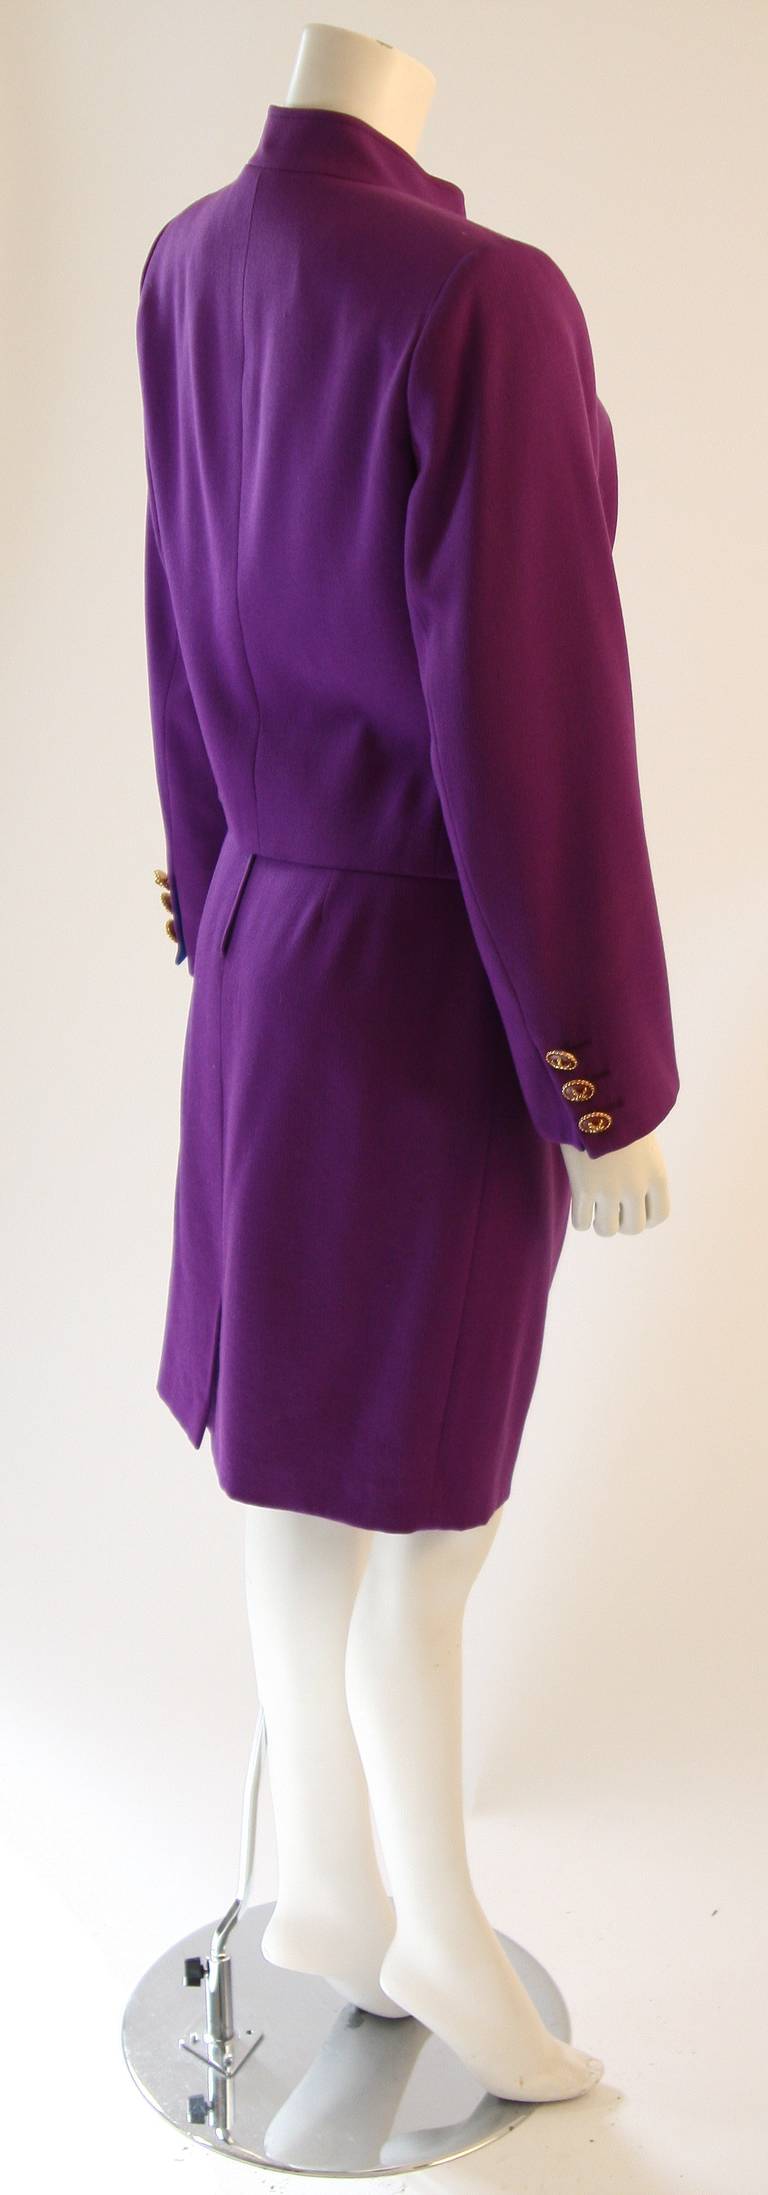 Valentino Miss V Purple Skirt Suit Size 44 10 In Excellent Condition For Sale In Los Angeles, CA